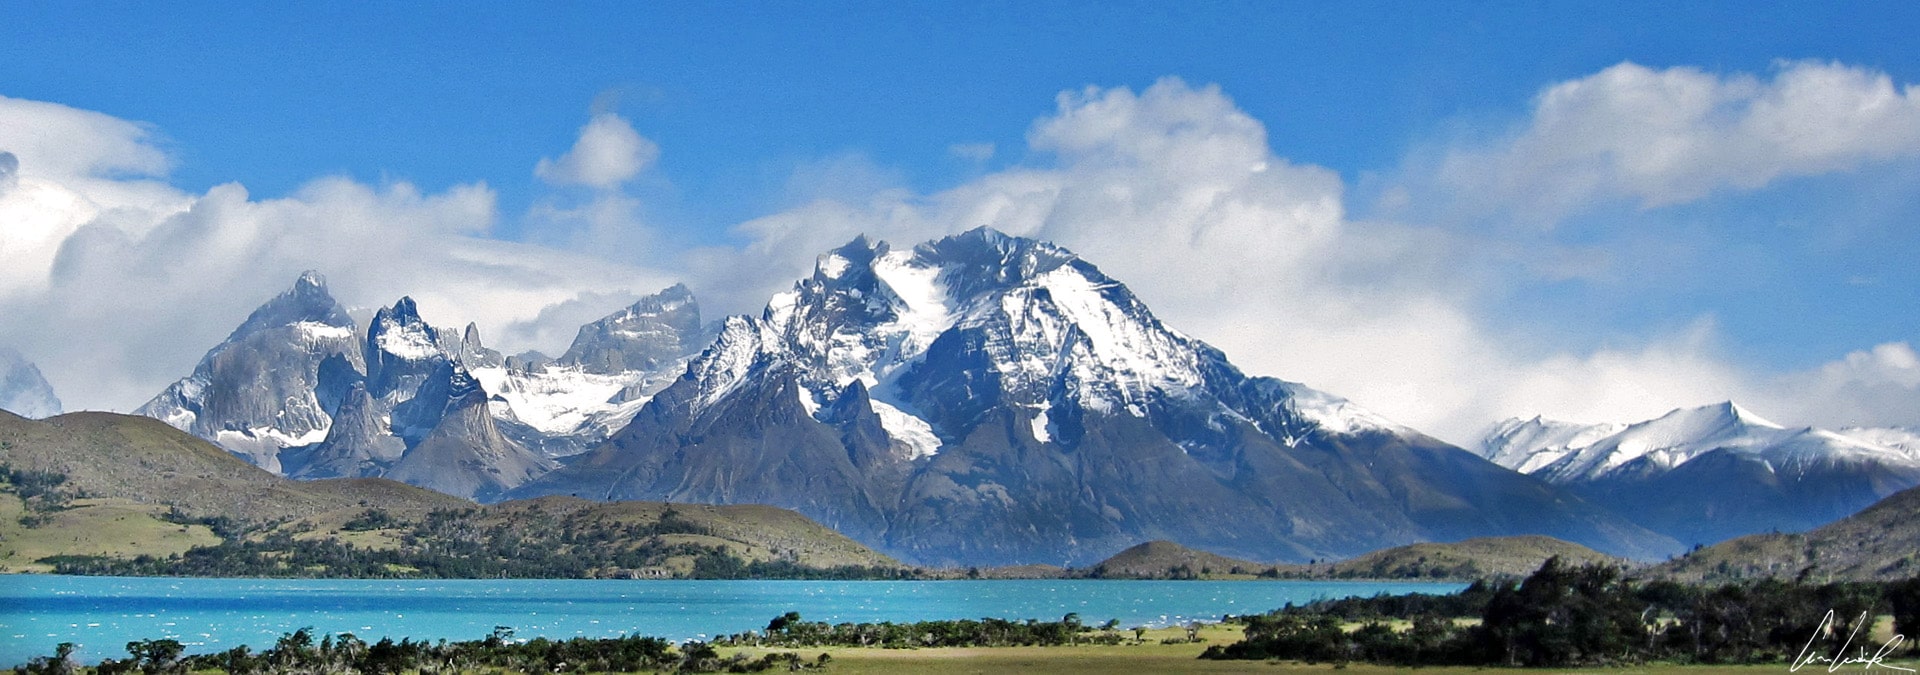 Torres del Paine, 50 shades of blue